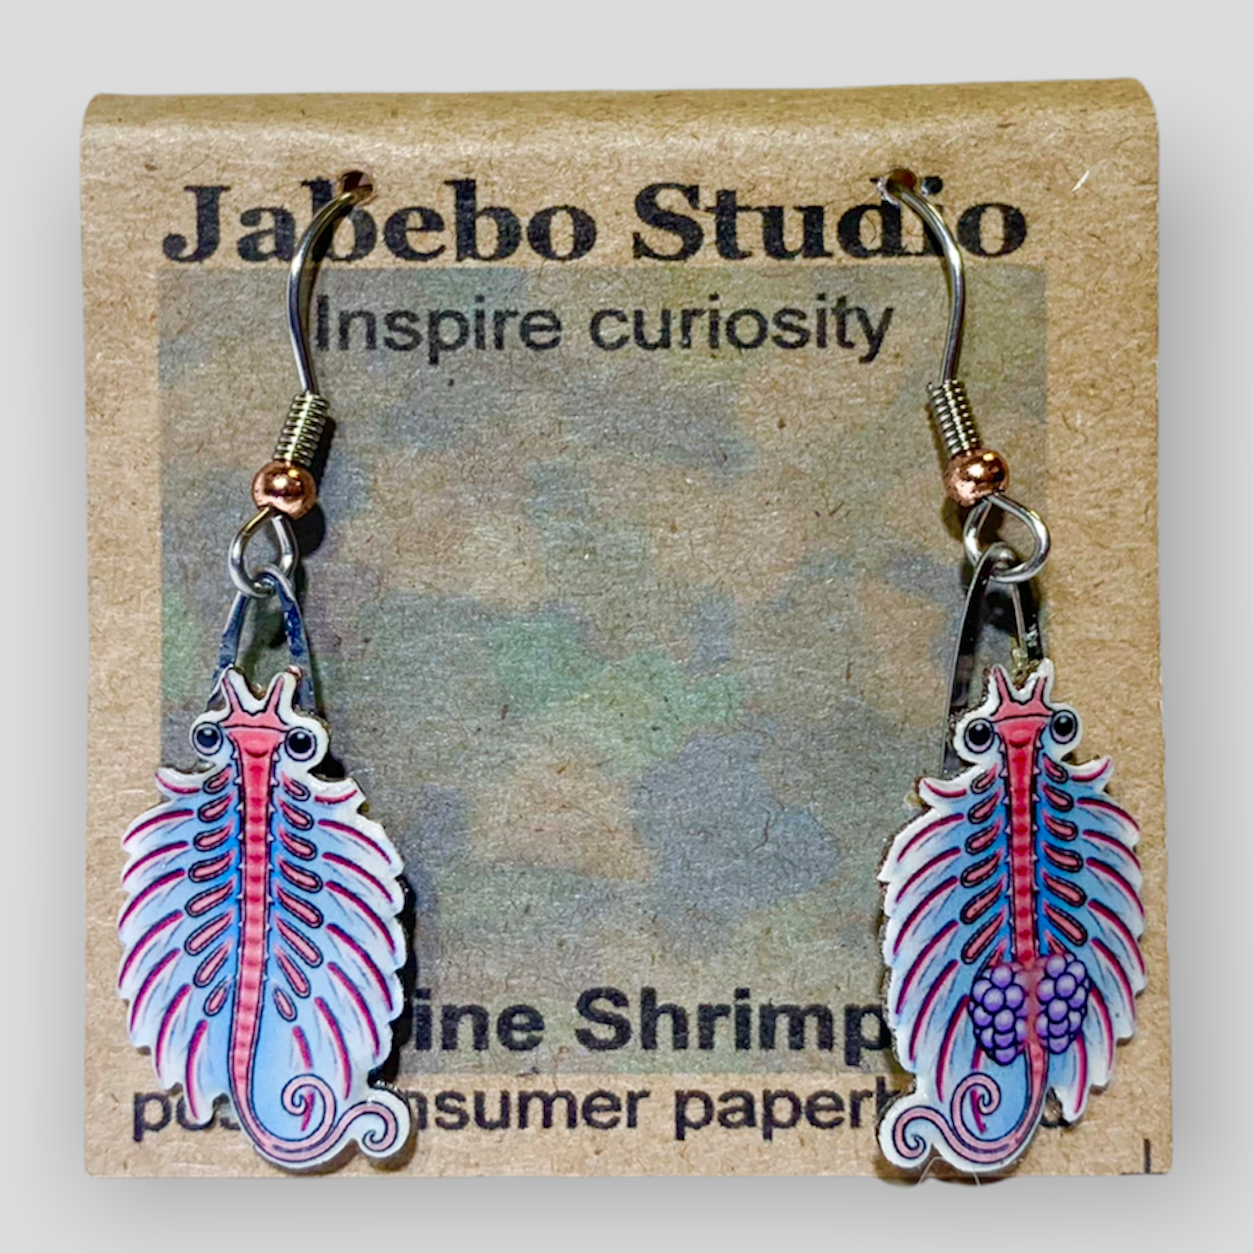 Picture shown is of 1 inch tall pair of earrings of the marine animal the Brine Shrimp.